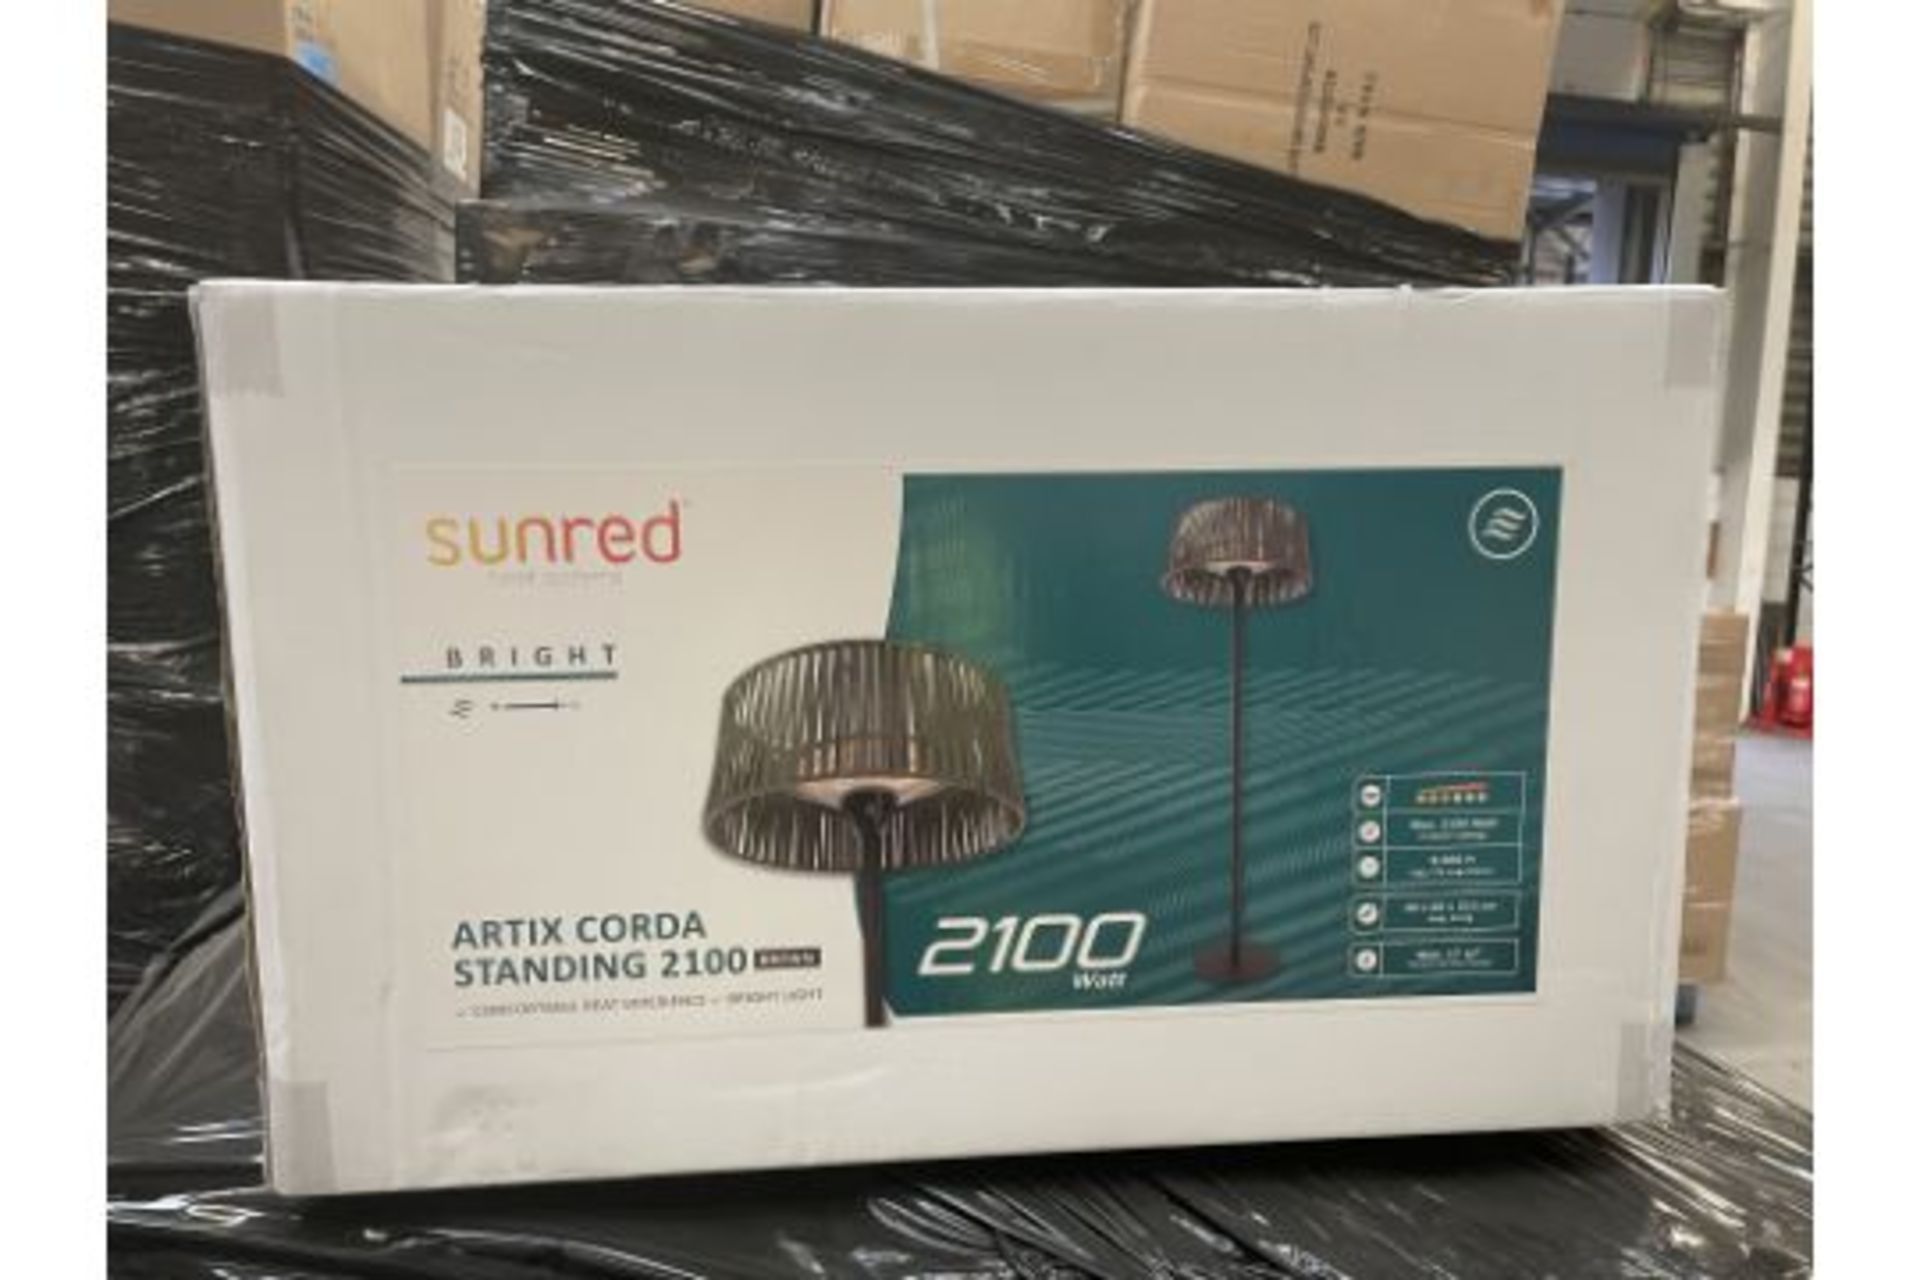 Trade Lot 4 X Brand New The Sunred Heater Artix Corda Standing 2100W RRP £429. A high quality and - Image 2 of 3